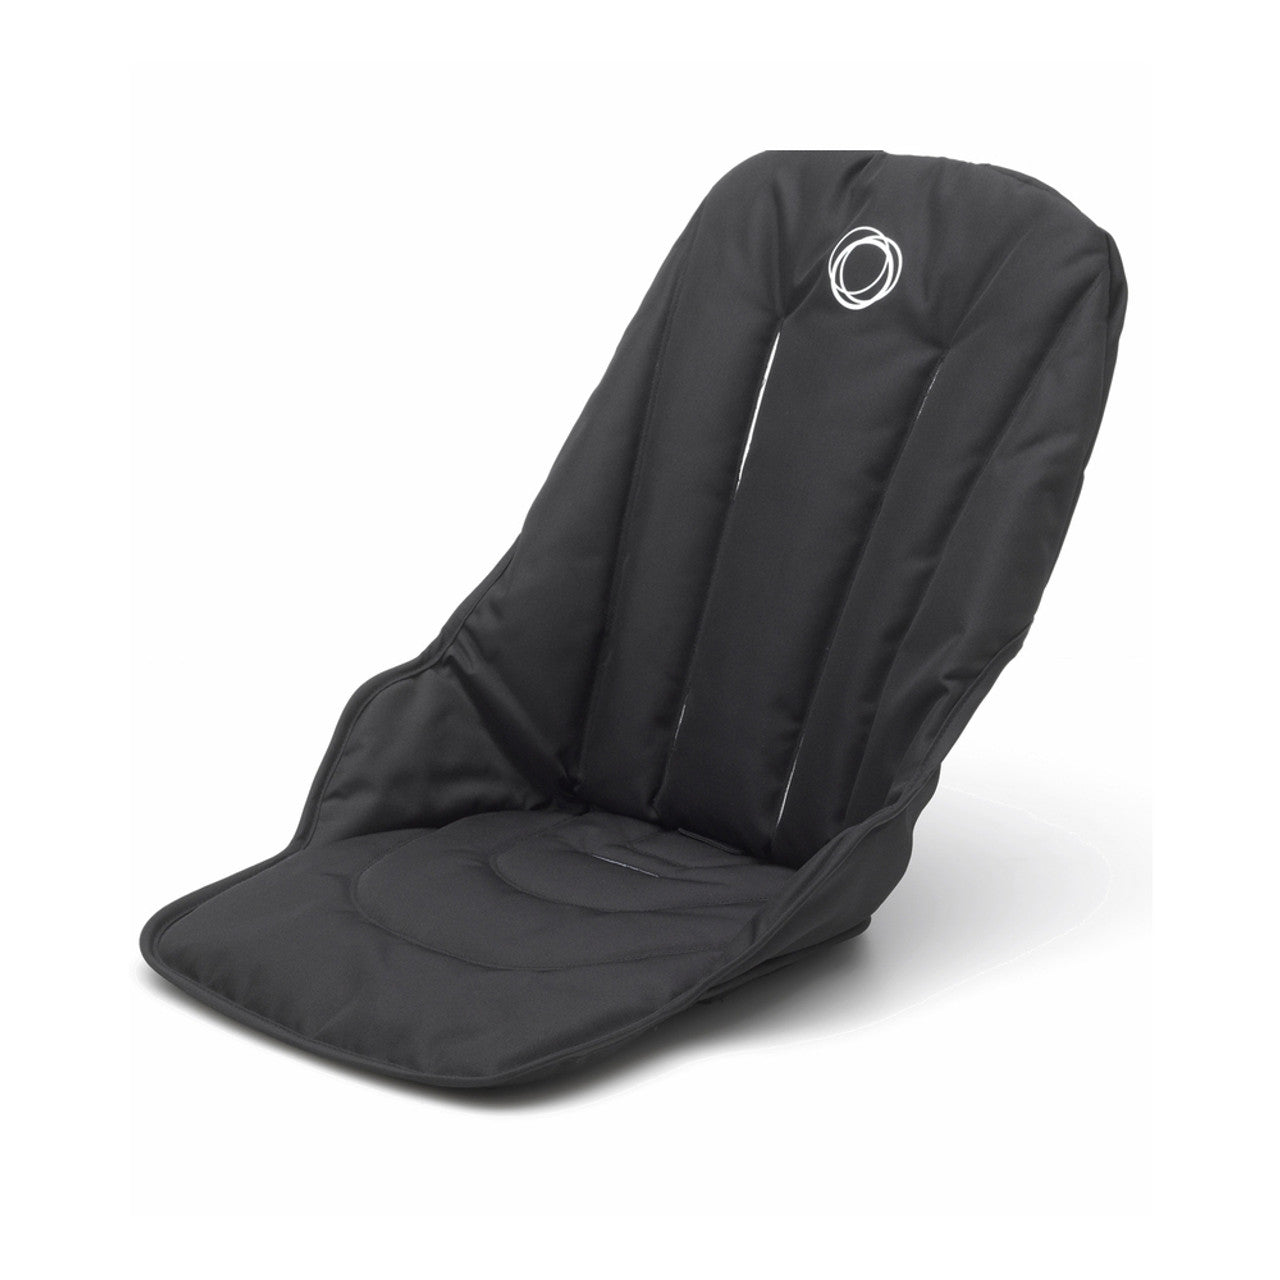 Bugaboo Bee3 Seat Cover